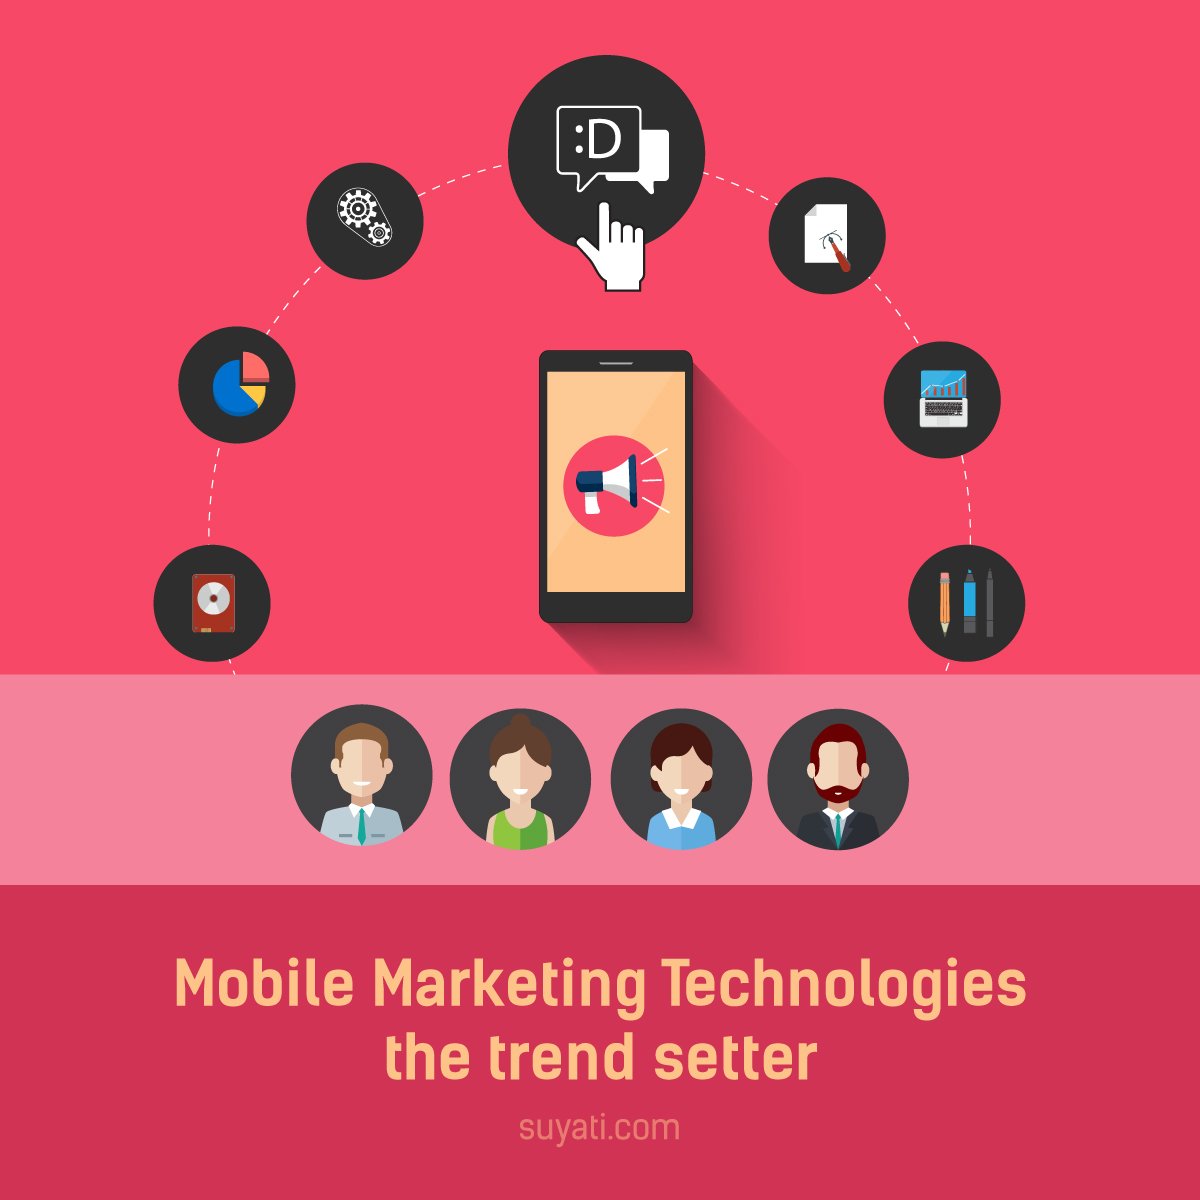 Amplifying your reach with mobile marketing technologies